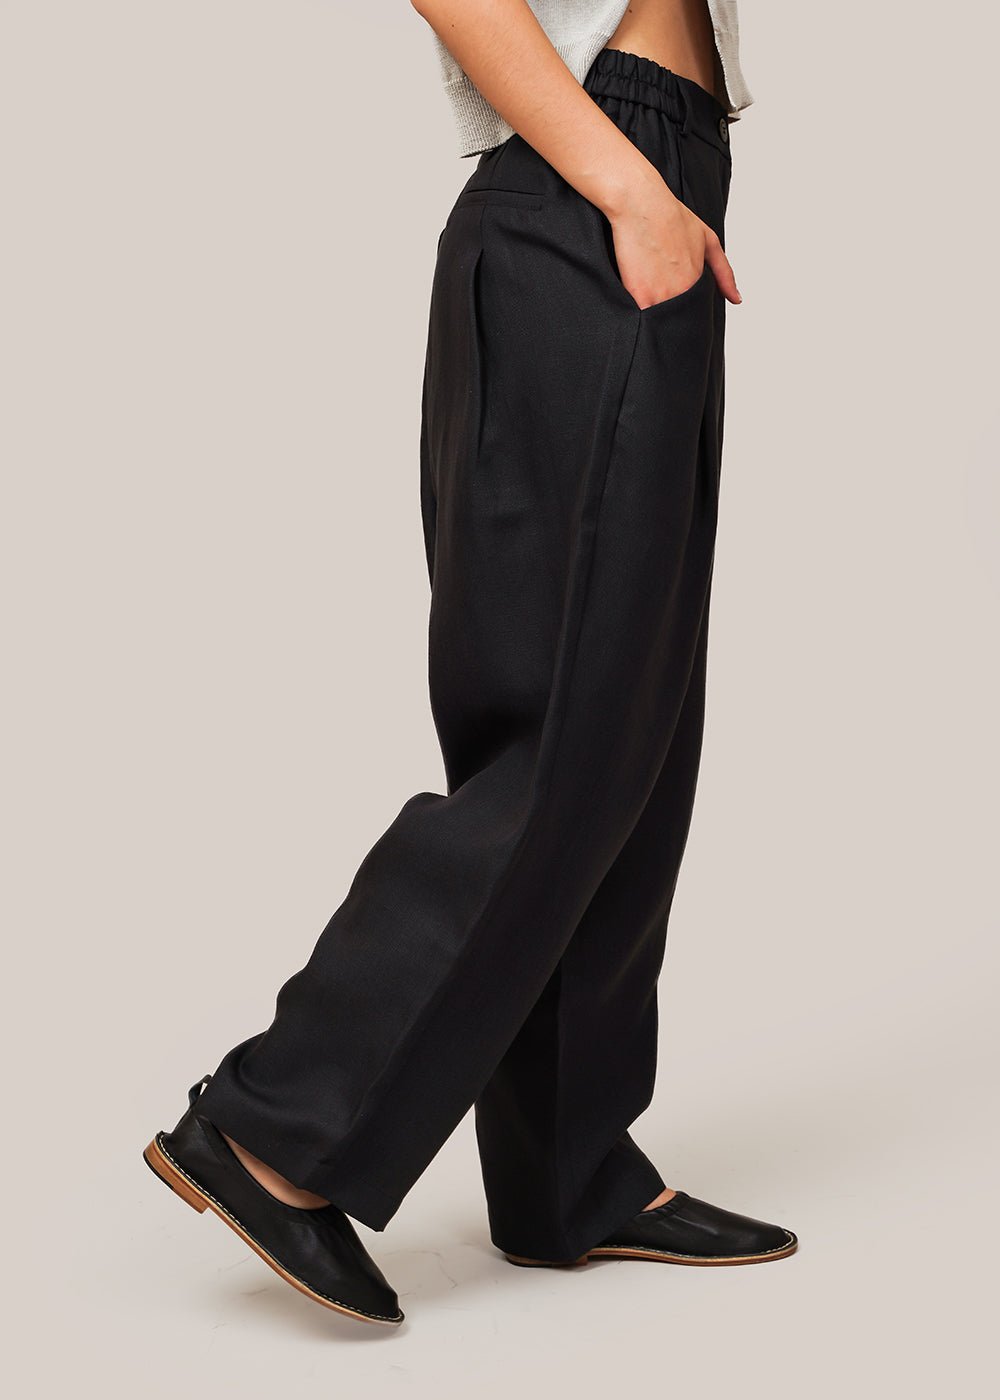 Cordera Black New Age Linen Pants - New Classics Studios Sustainable Ethical Fashion Canada